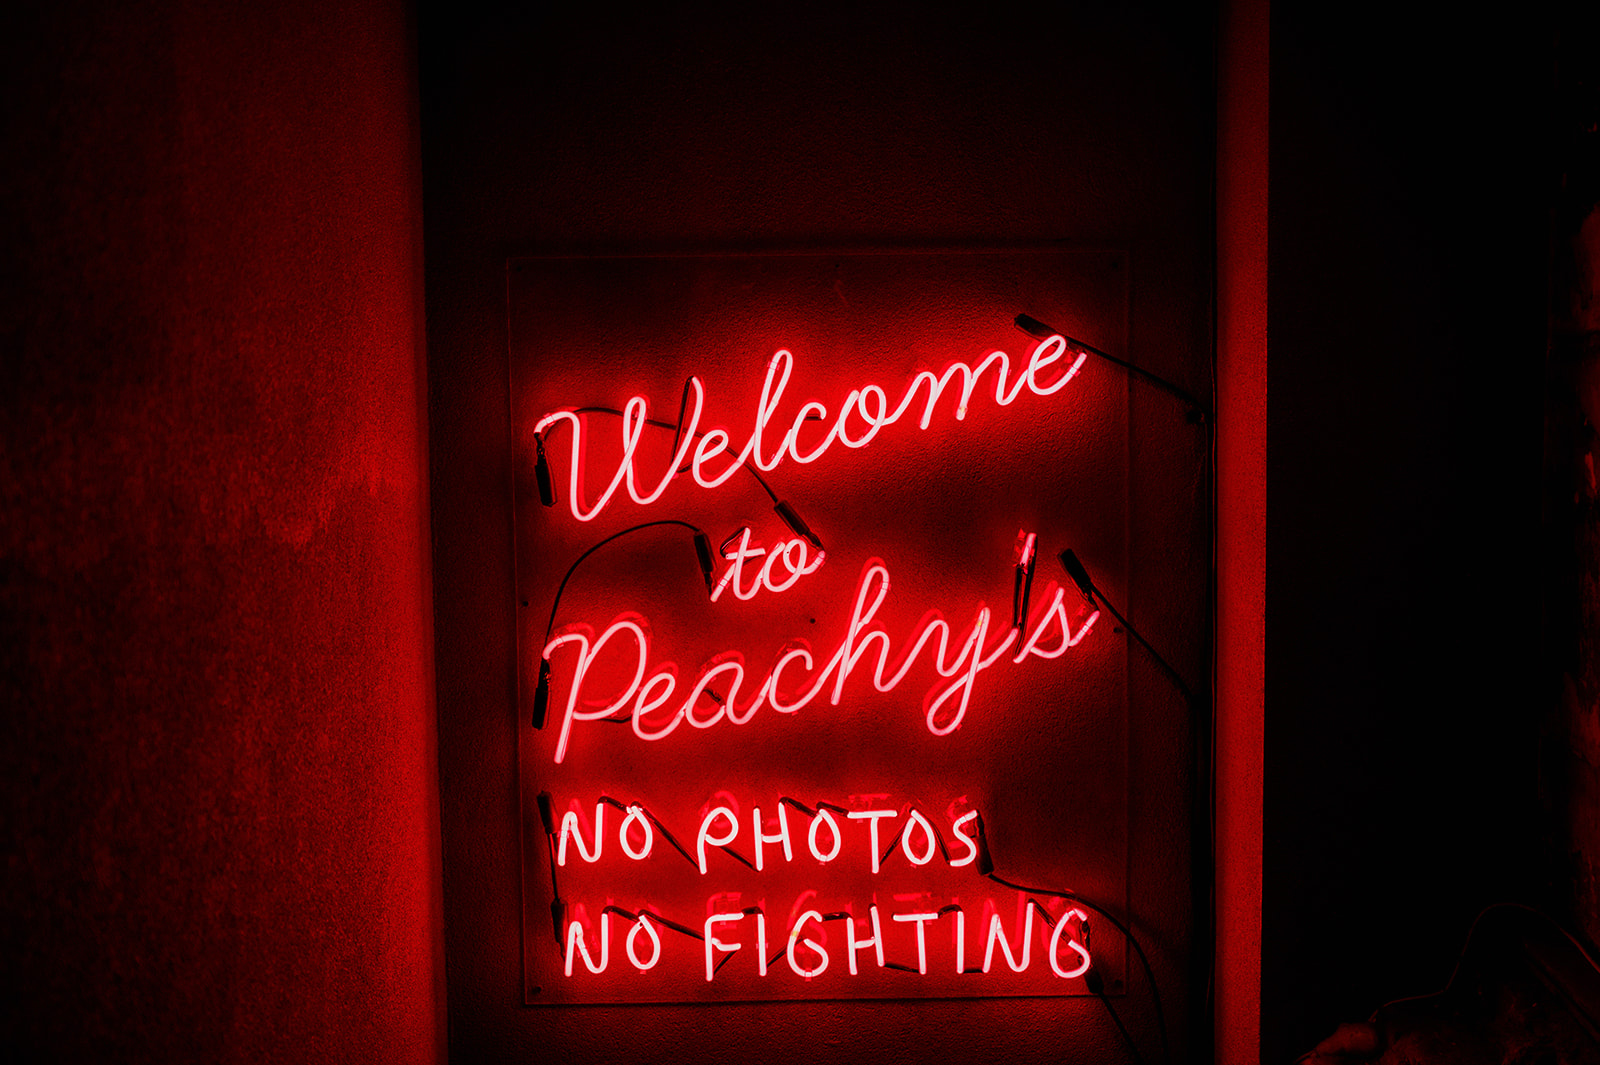 "Welcome to Peachy's no photos, no fighting" neon sign.